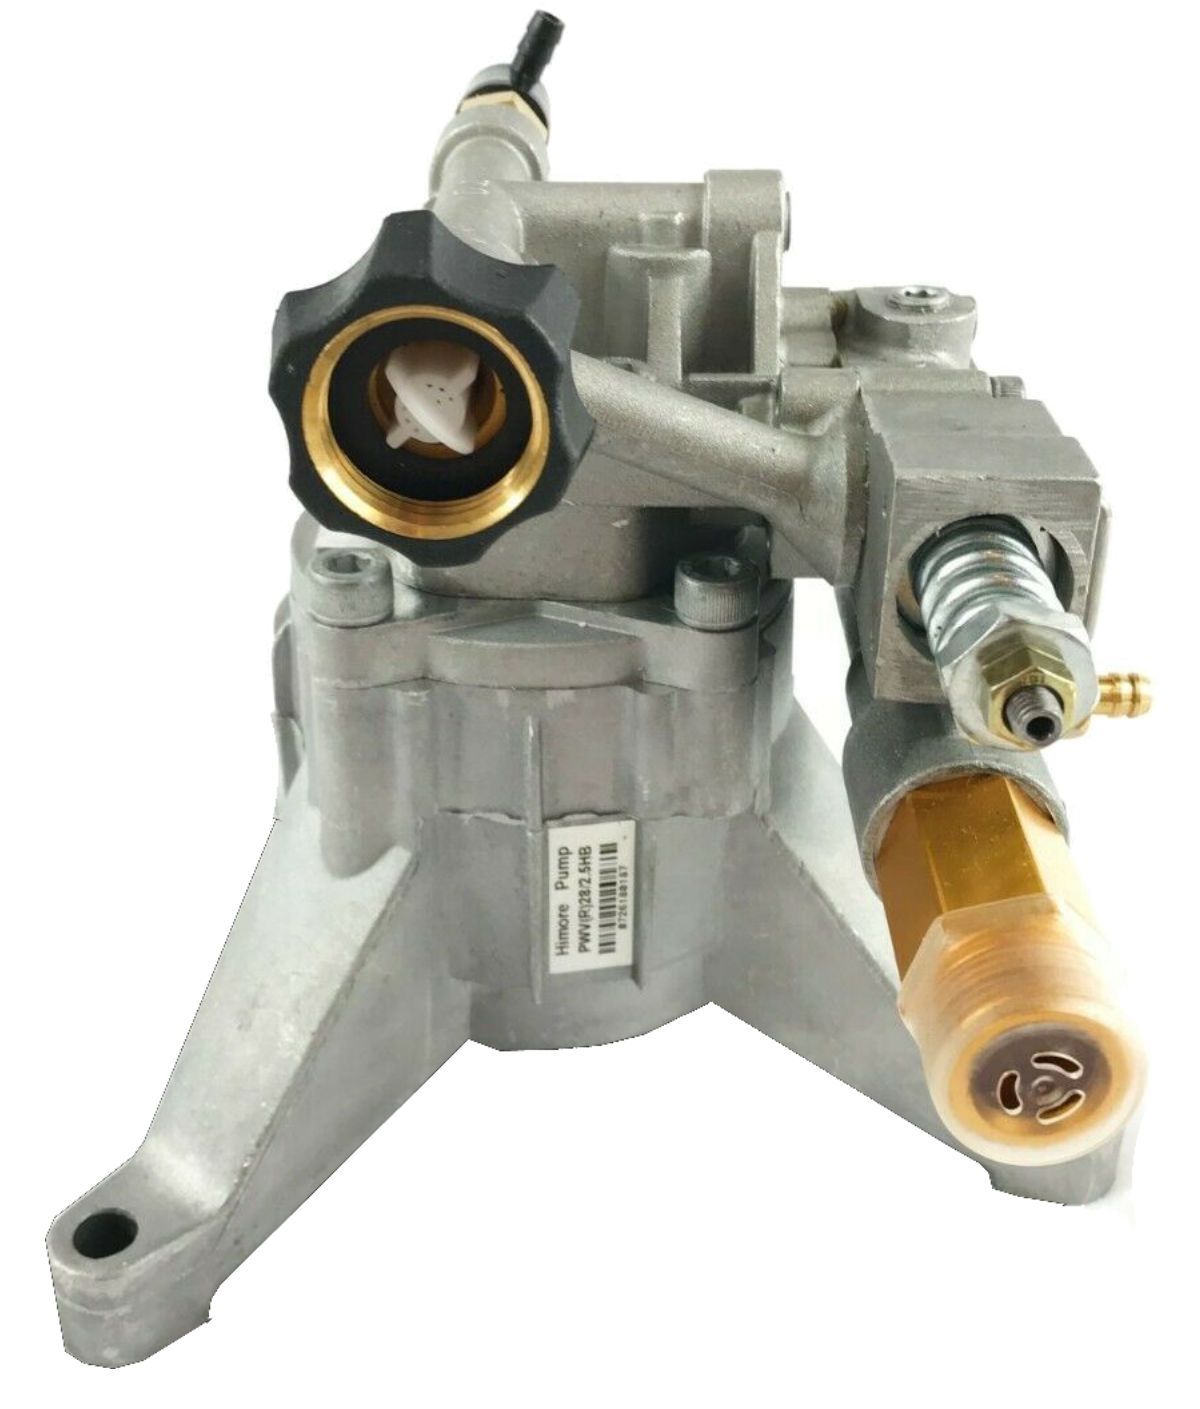 2700 PSI PRESSURE WASHER WATER PUMP Campbell Hausfeld PW185015LE - AE-Power